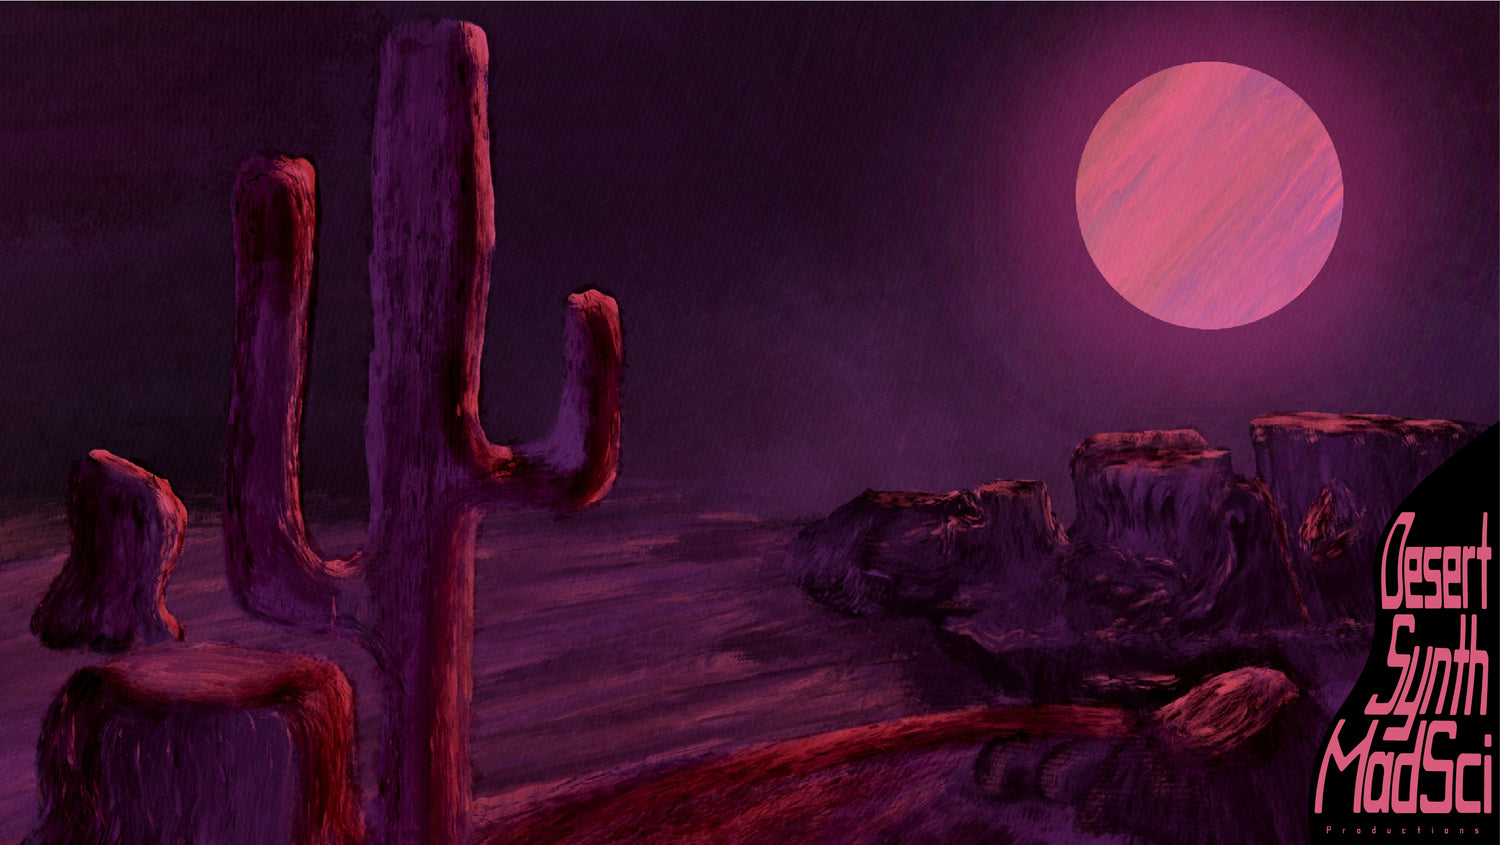 An illustration of the desert with cactus in foreground and arid rock formations in the background